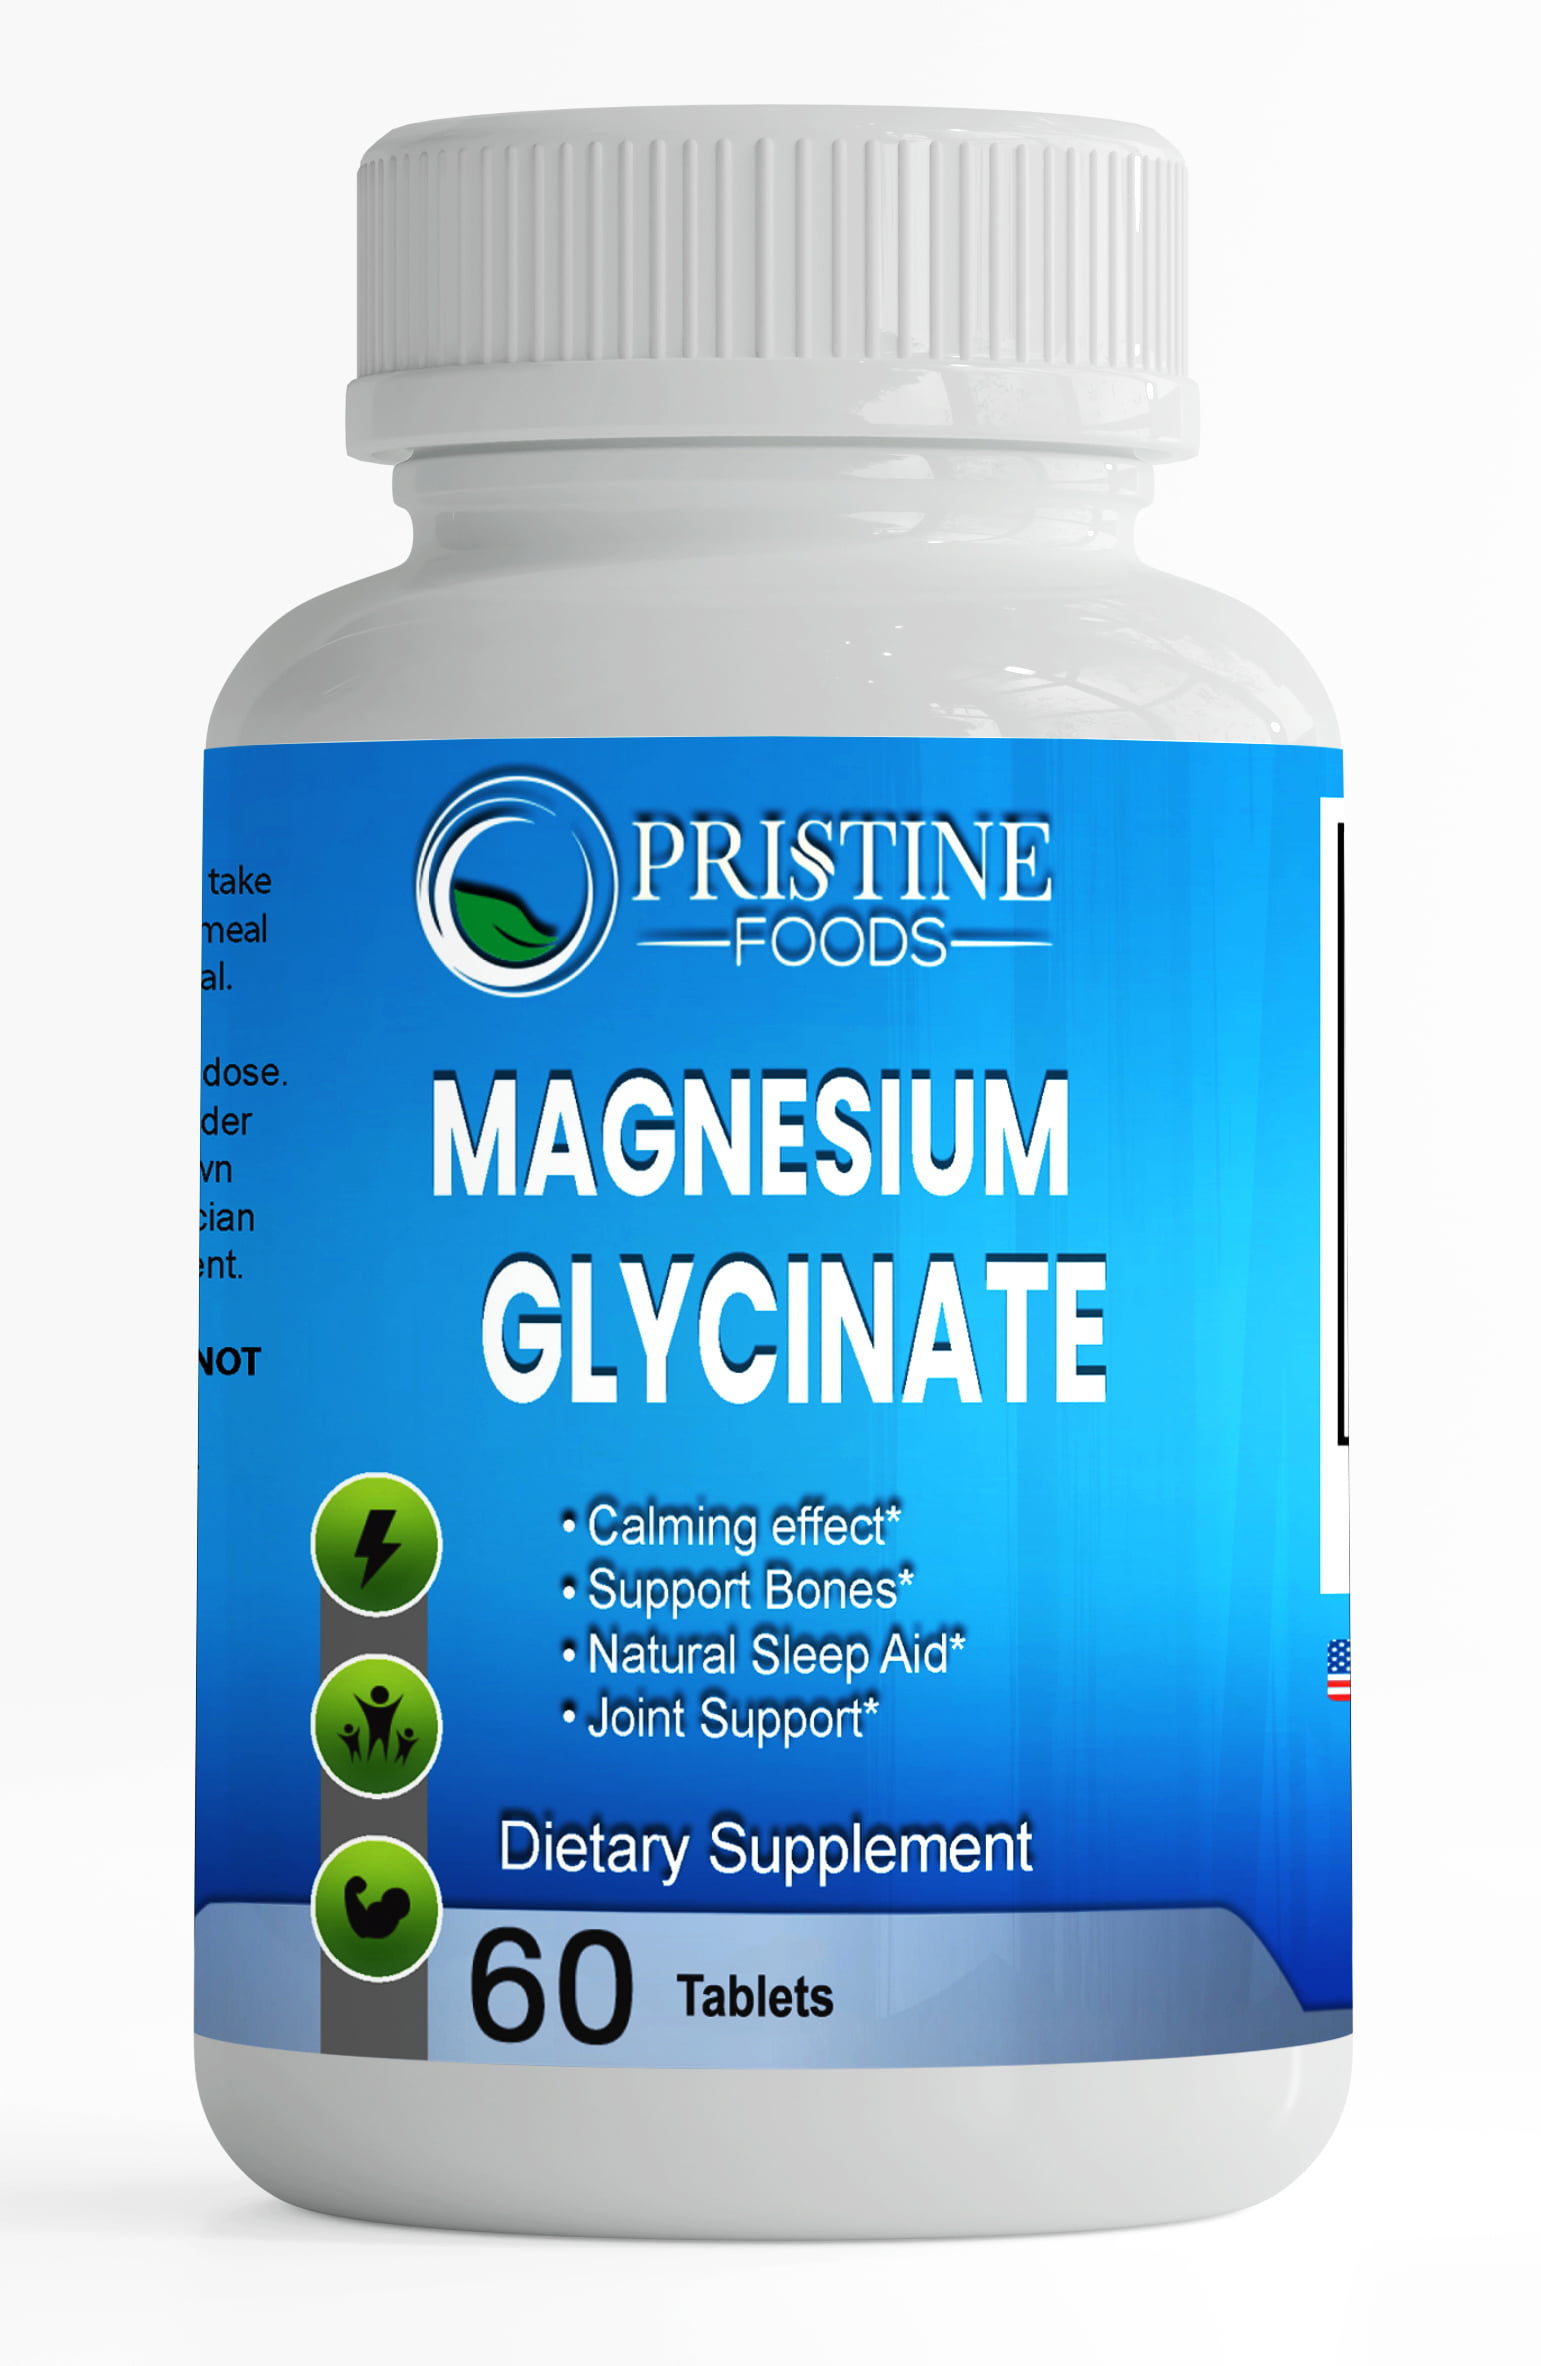 Pristine Foods Magnesium Glycinate 425mg Complex - High Absorption Muscle Relaxation, Bone & Joint Support, Chelate Supplement - 60 Tablets